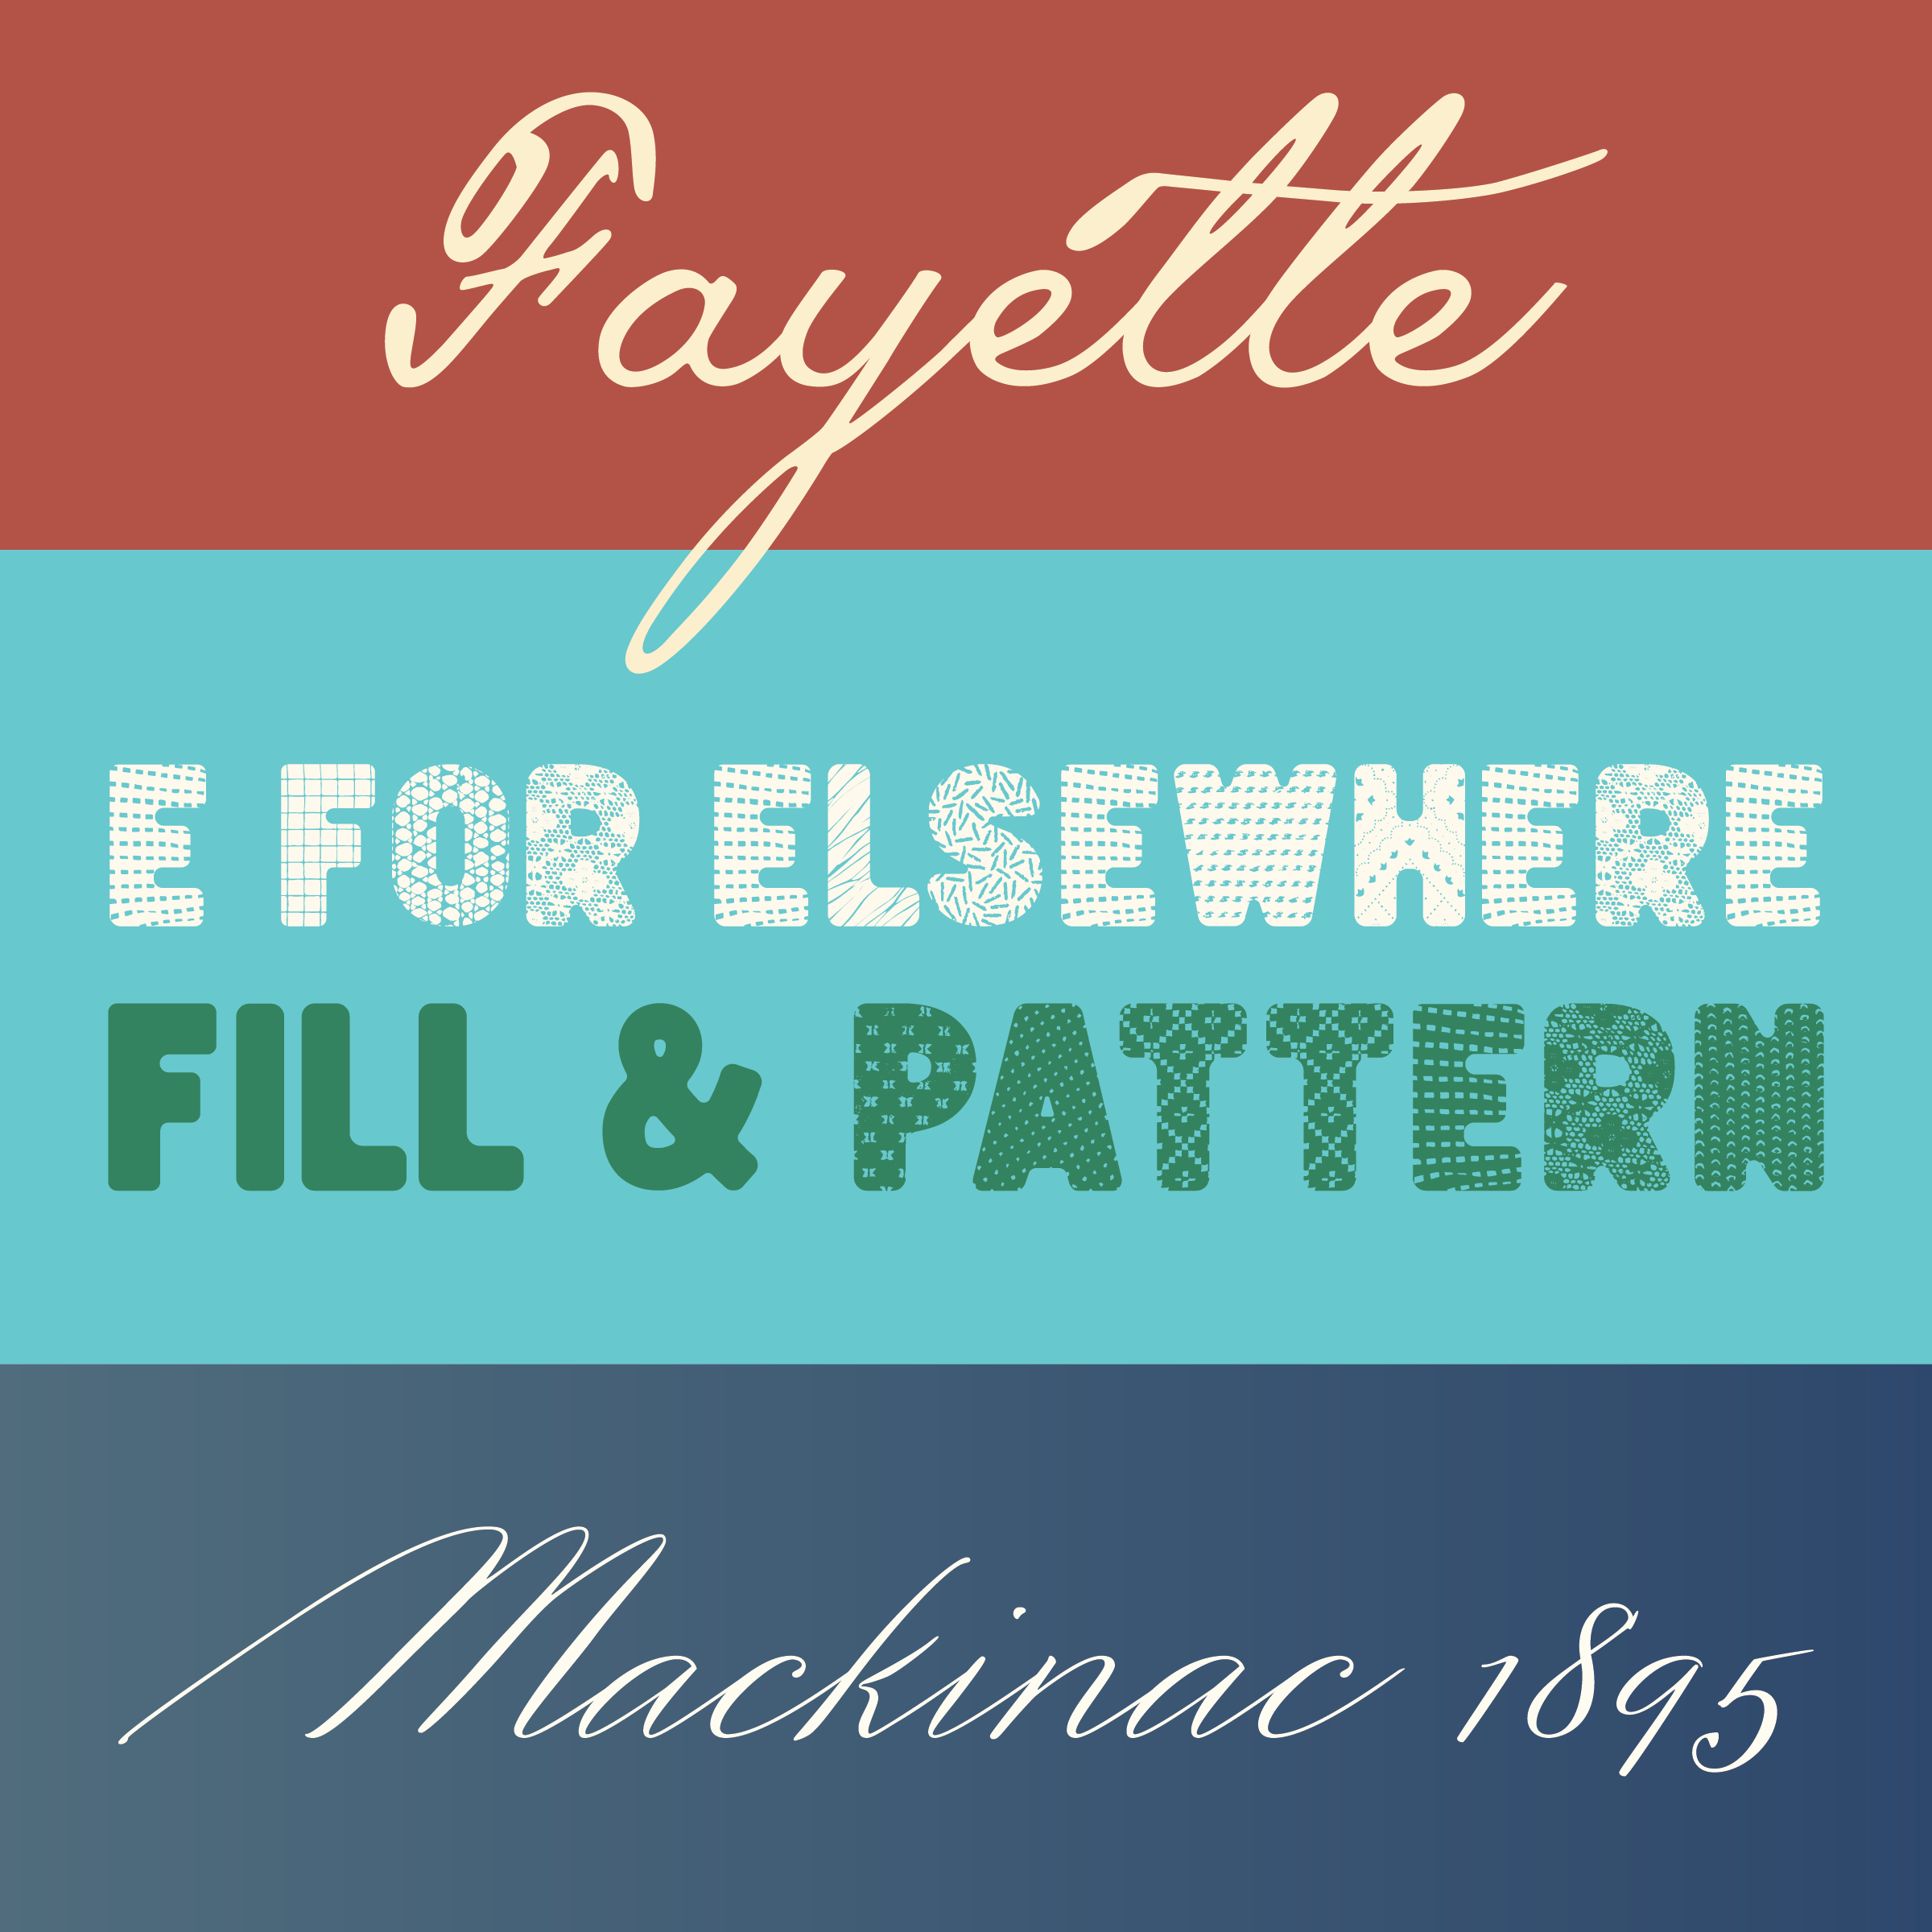 A composite of Cinelli's three place-based digital typefaces